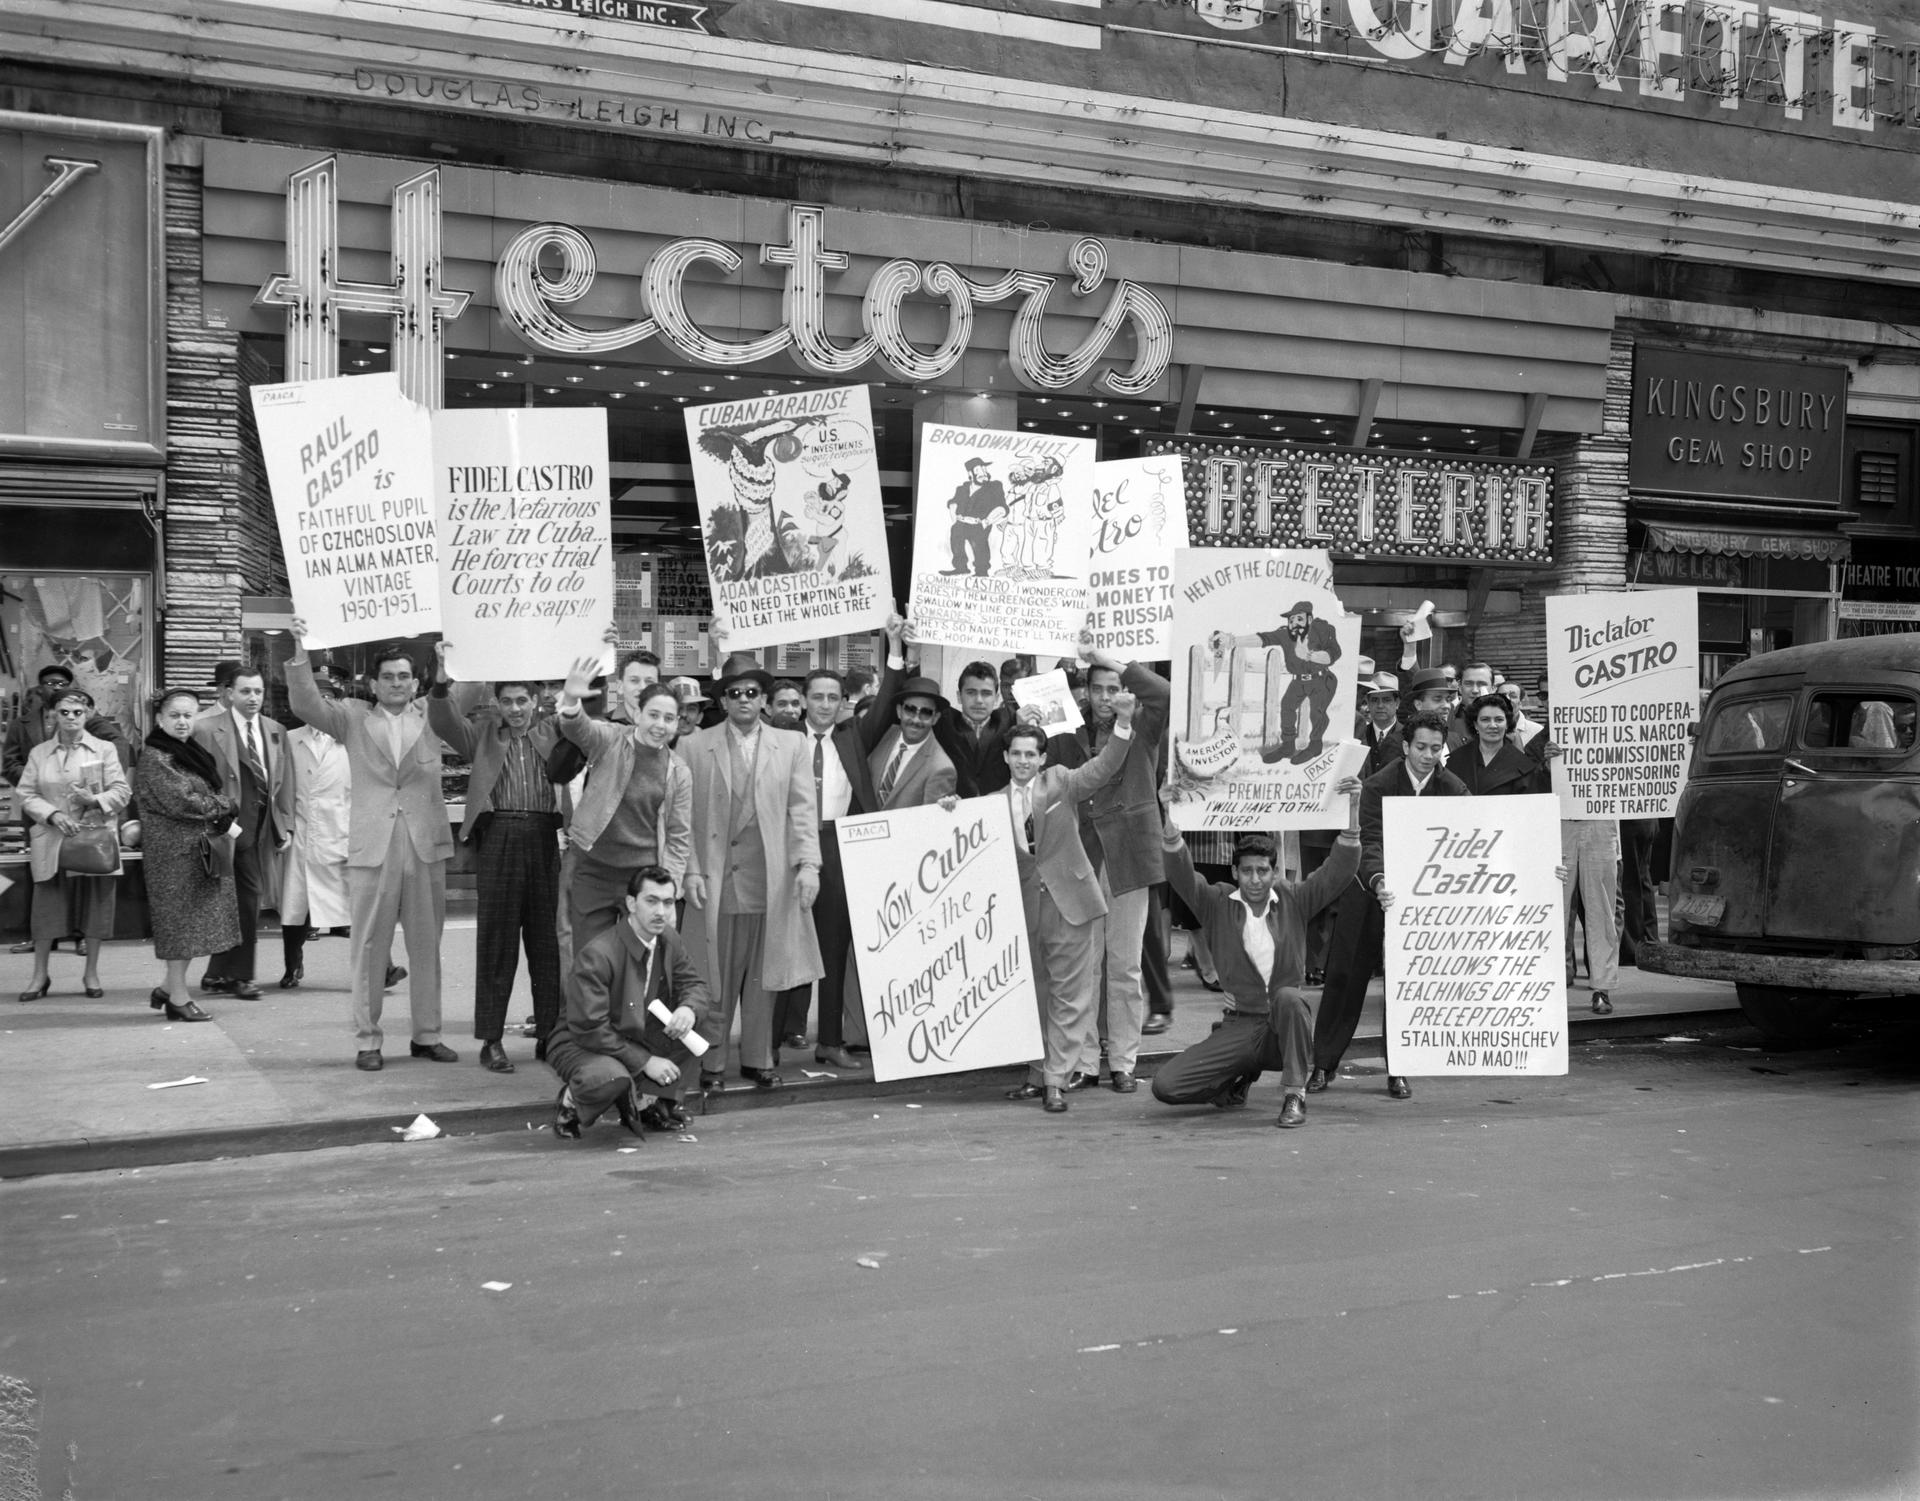 April 1959 - New York City, NY - A crowd of Anti-Castro protesters line Broadway in Manhattan during Fidel Castro's visit.